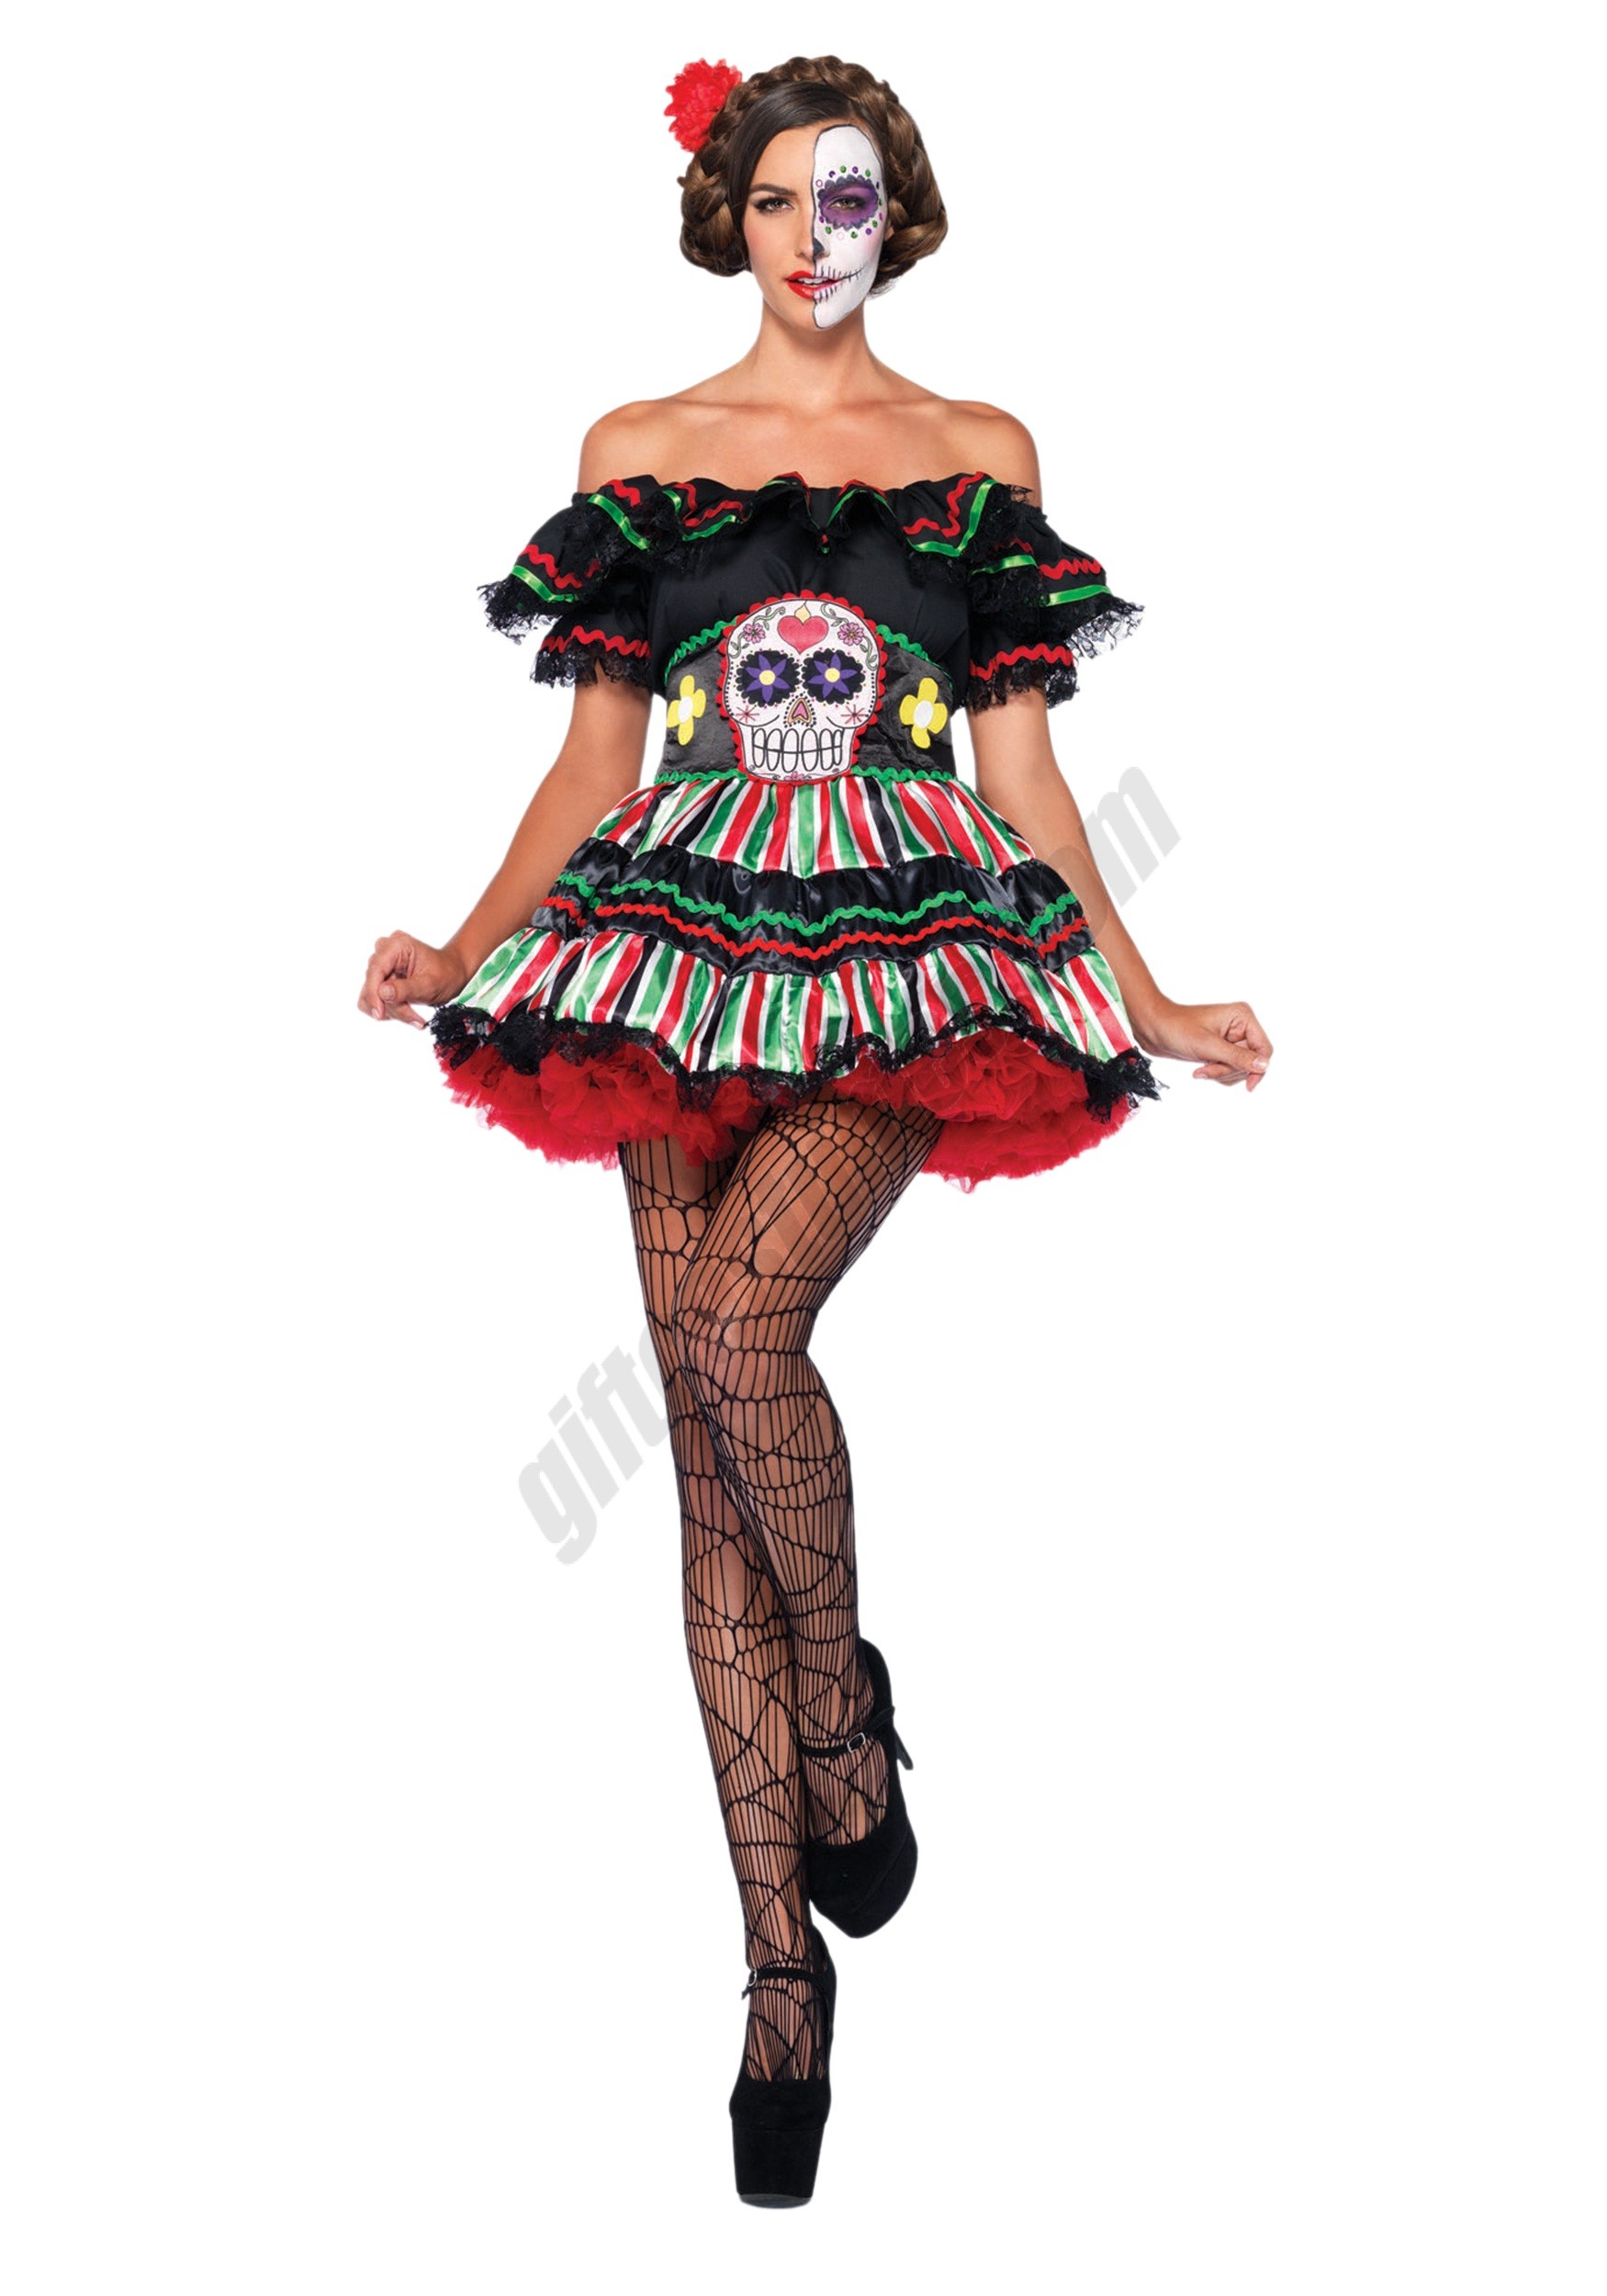 Day of the Dead Doll Costume - Women's - Day of the Dead Doll Costume - Women's